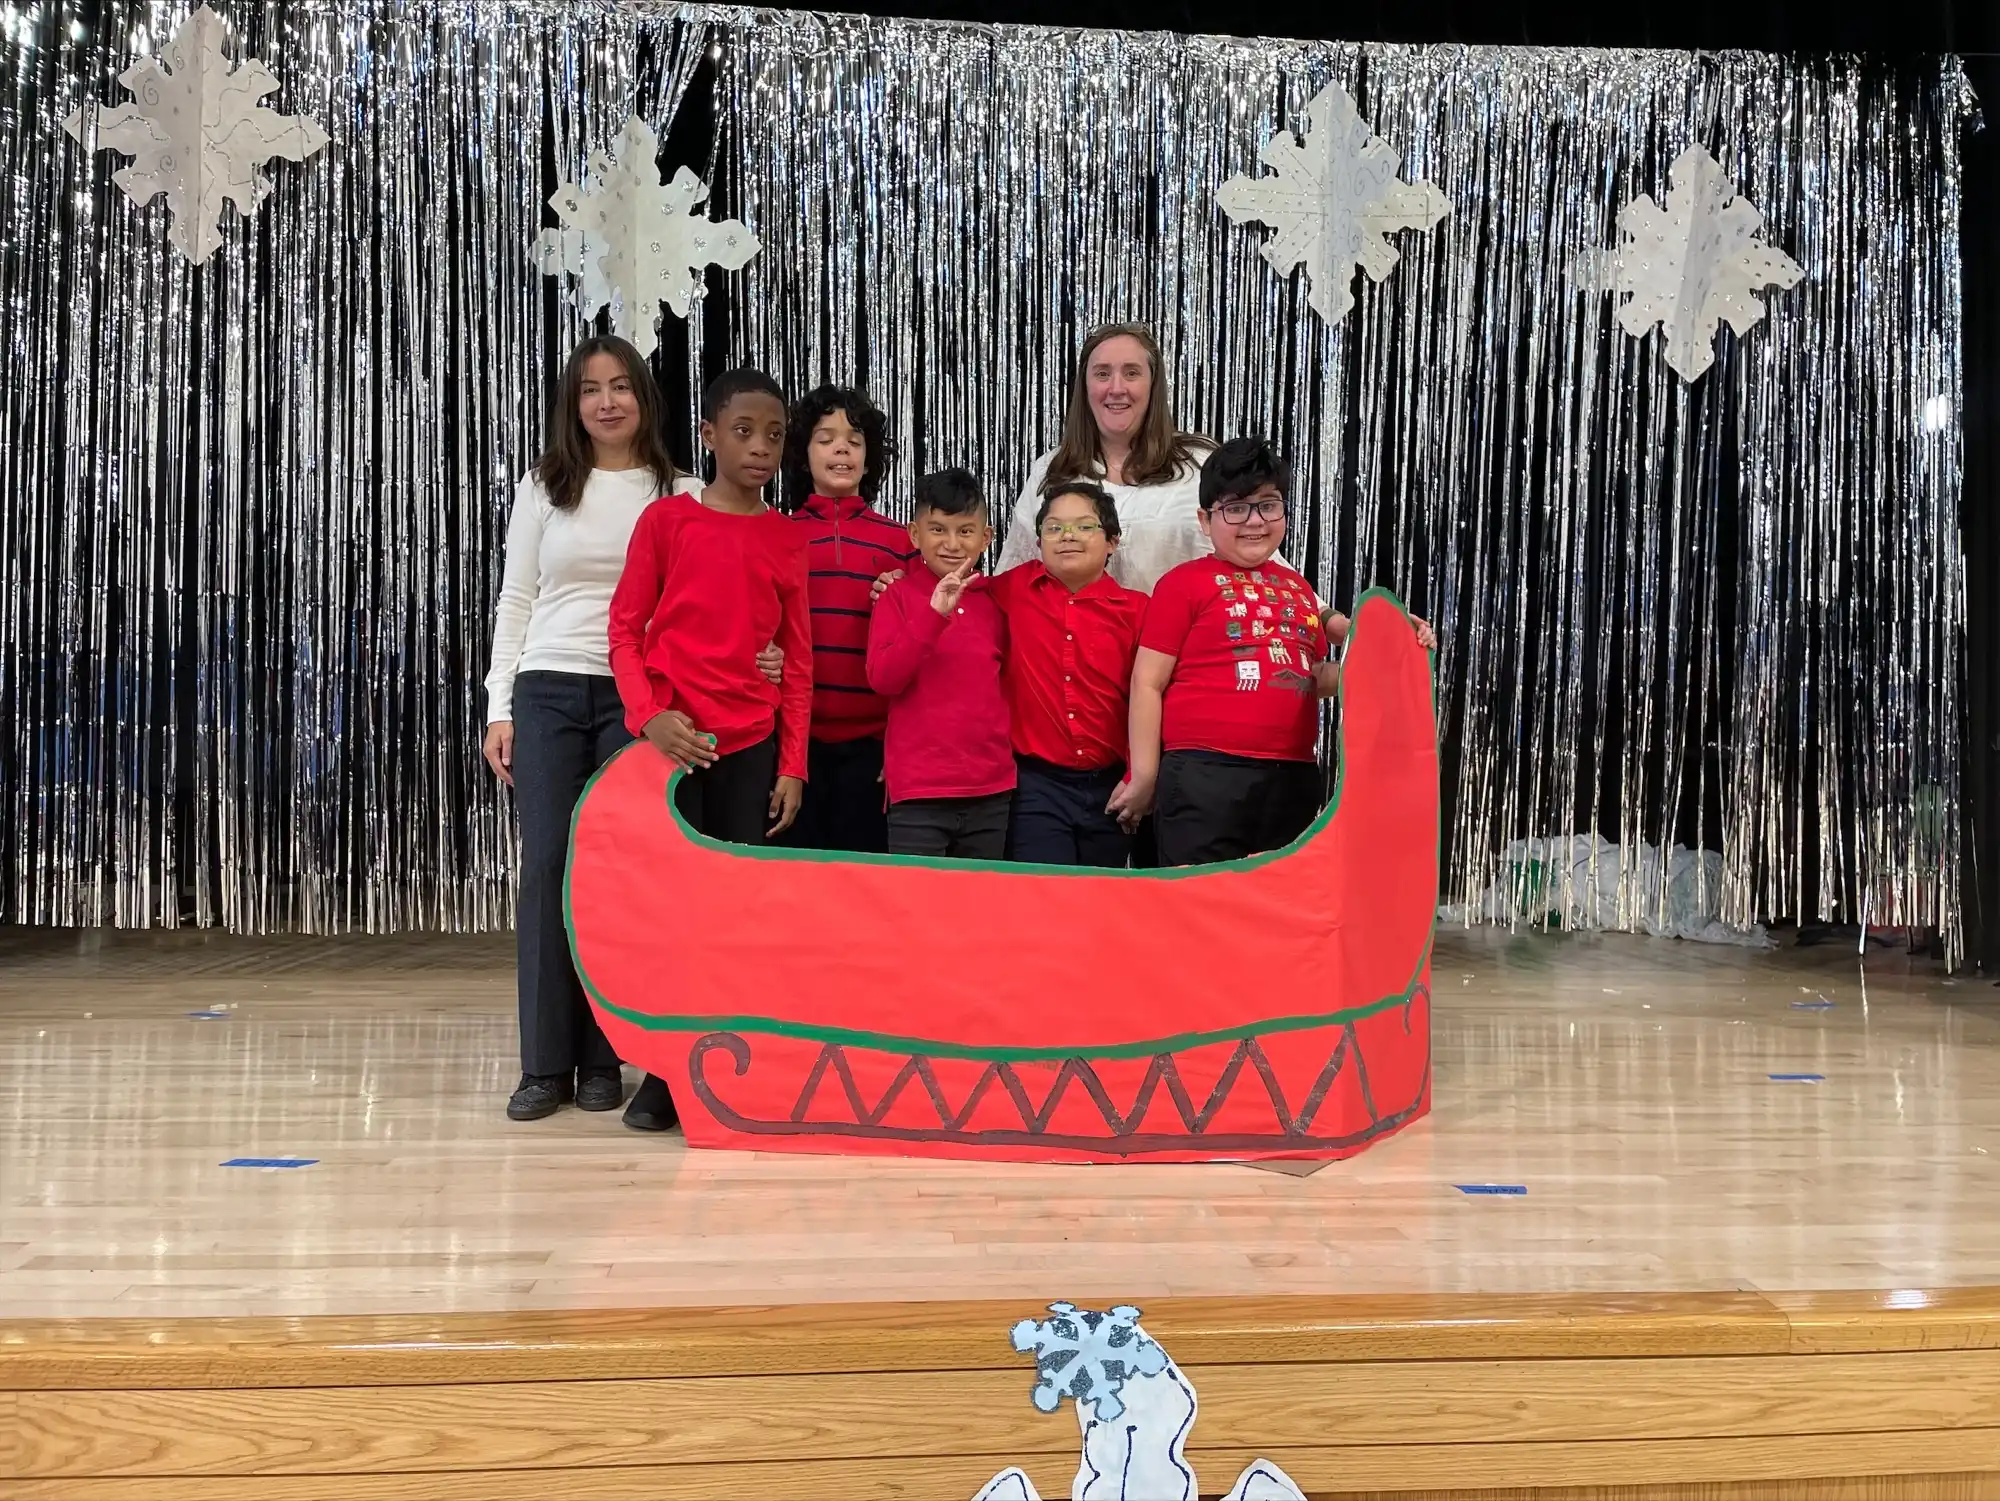 5 elementary school students and two teachers standing next to a cardboard red sleigh.